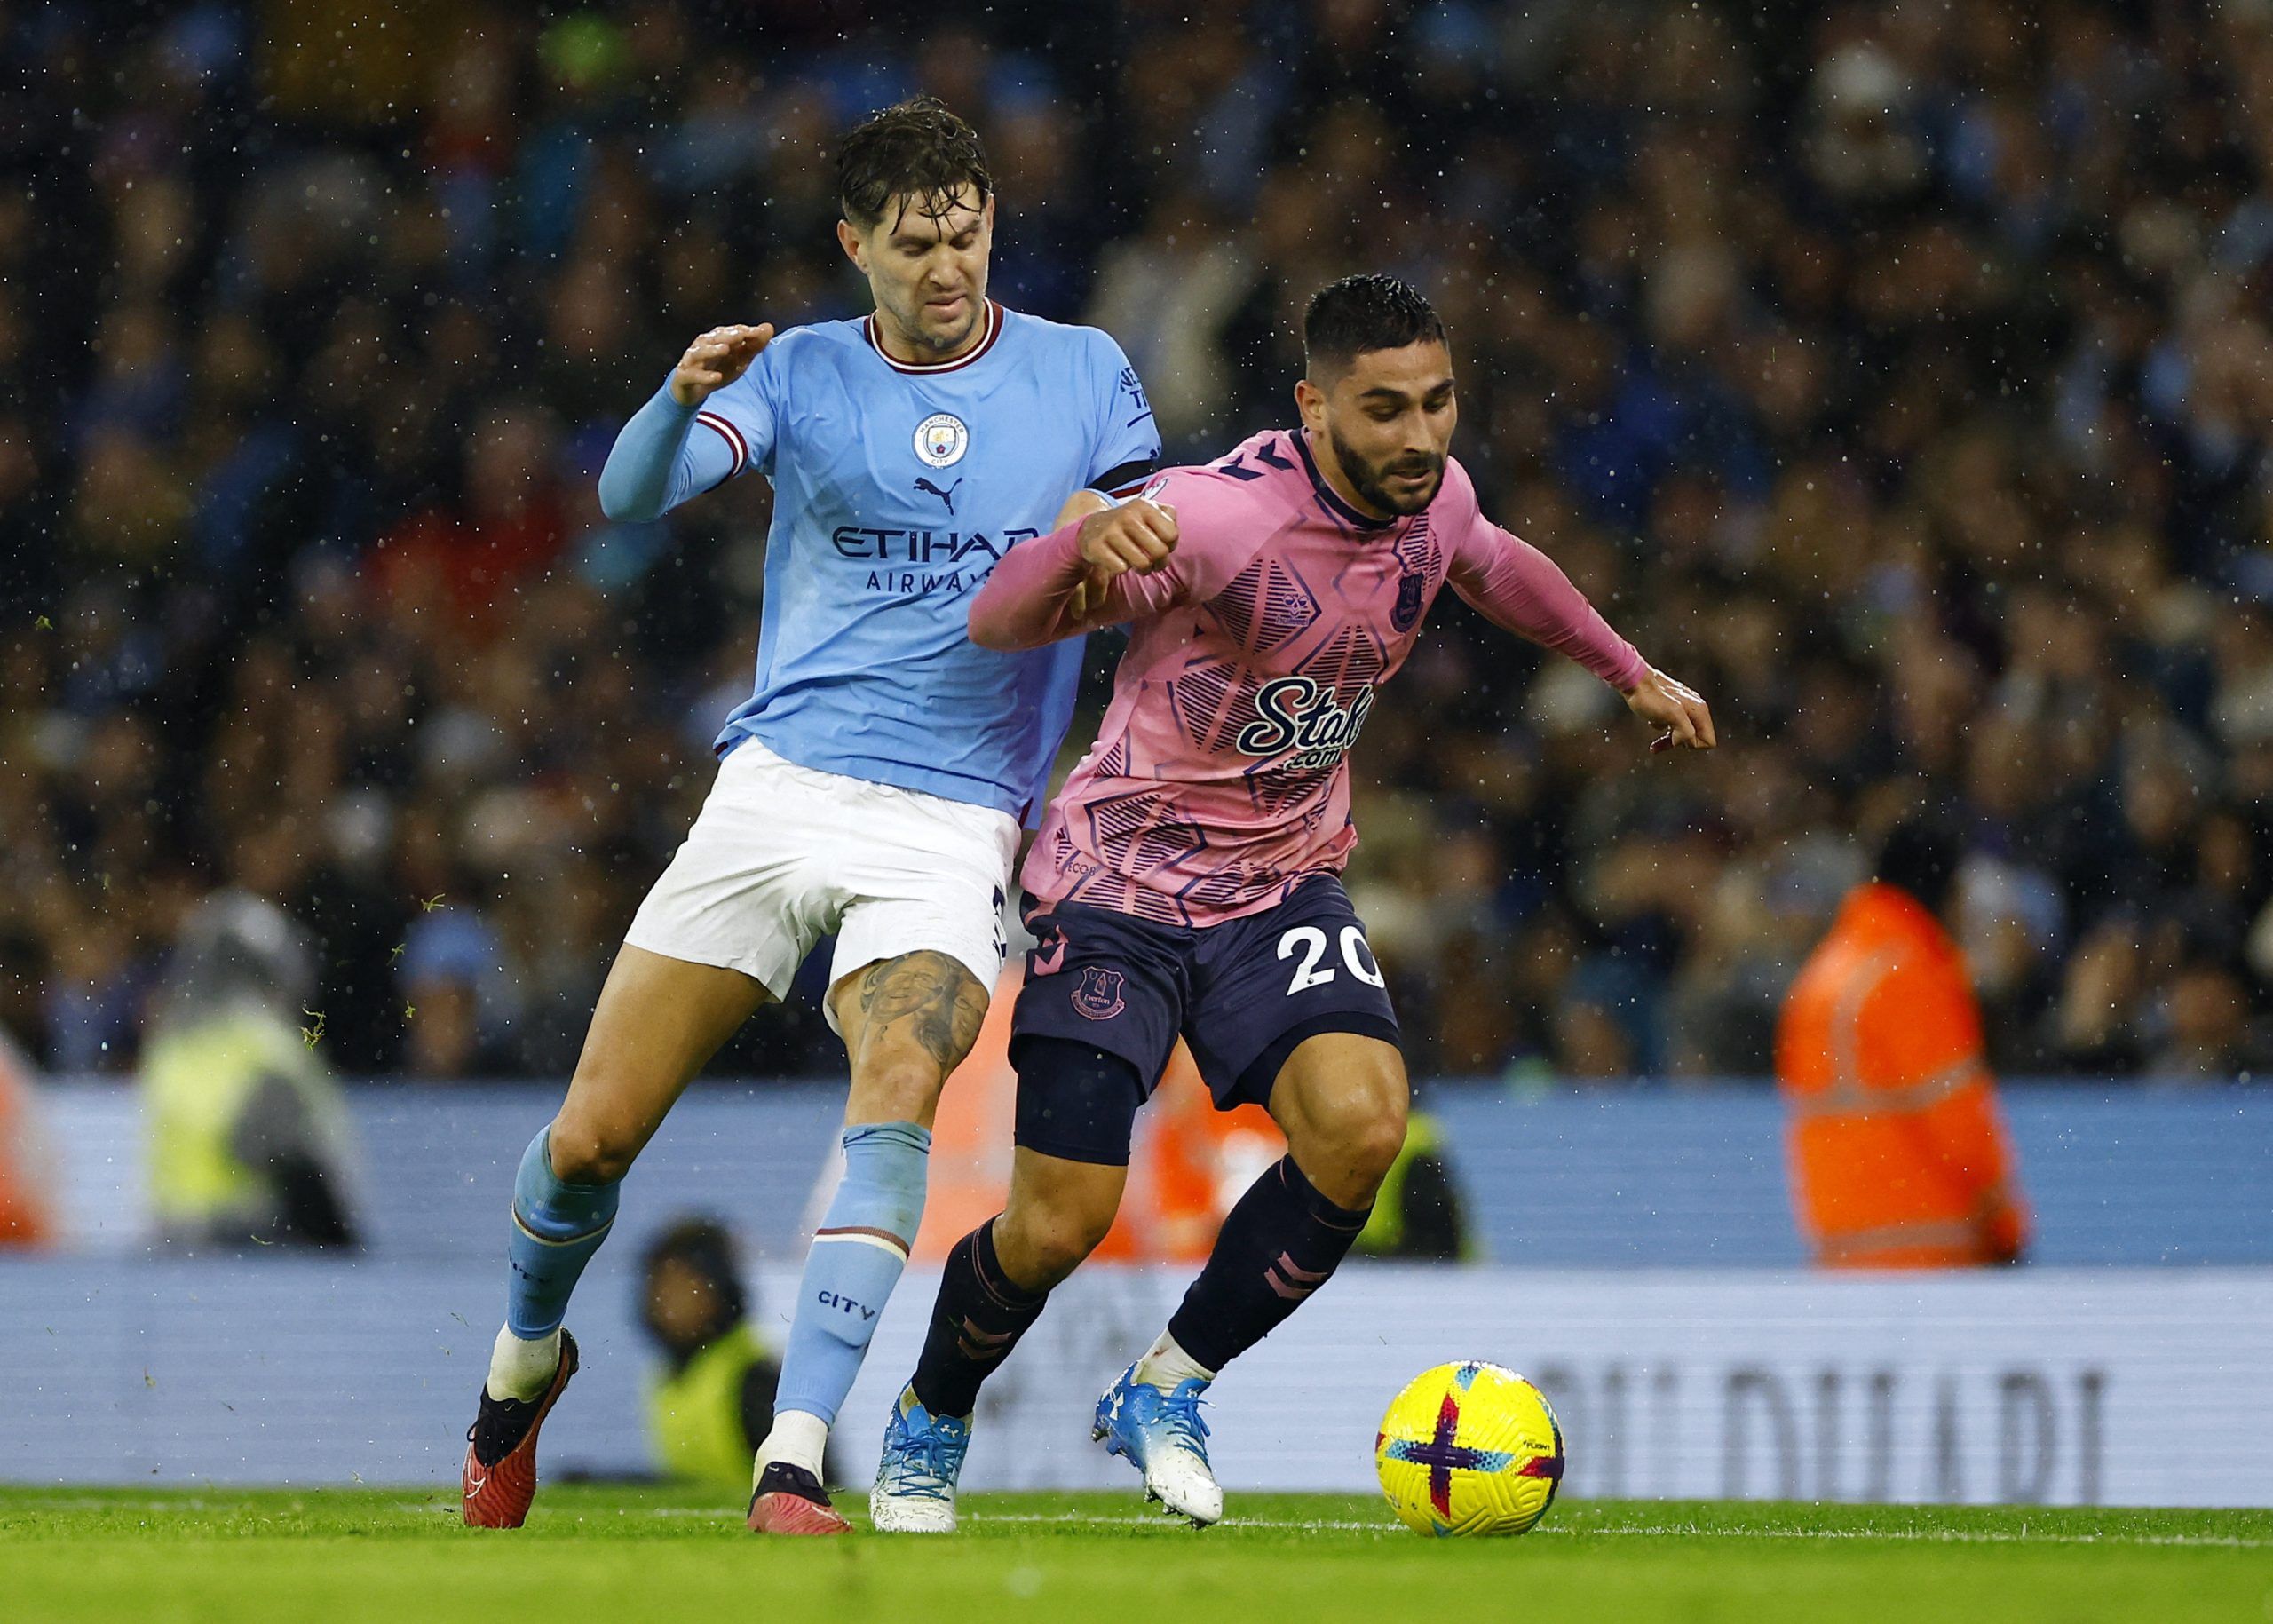 Soccer Football - Premier League - Manchester City v Everton - Etihad Stadium, Manchester, Britain - December 31, 2022 Everton's Neal Maupay in action with Manchester City's John Stones Action Images via Reuters/Andrew Boyers EDITORIAL USE ONLY. No use with unauthorized audio, video, data, fixture lists, club/league logos or 'live' services. Online in-match use limited to 75 images, no video emulation. No use in betting, games or single club /league/player publications.  Please contact your acco